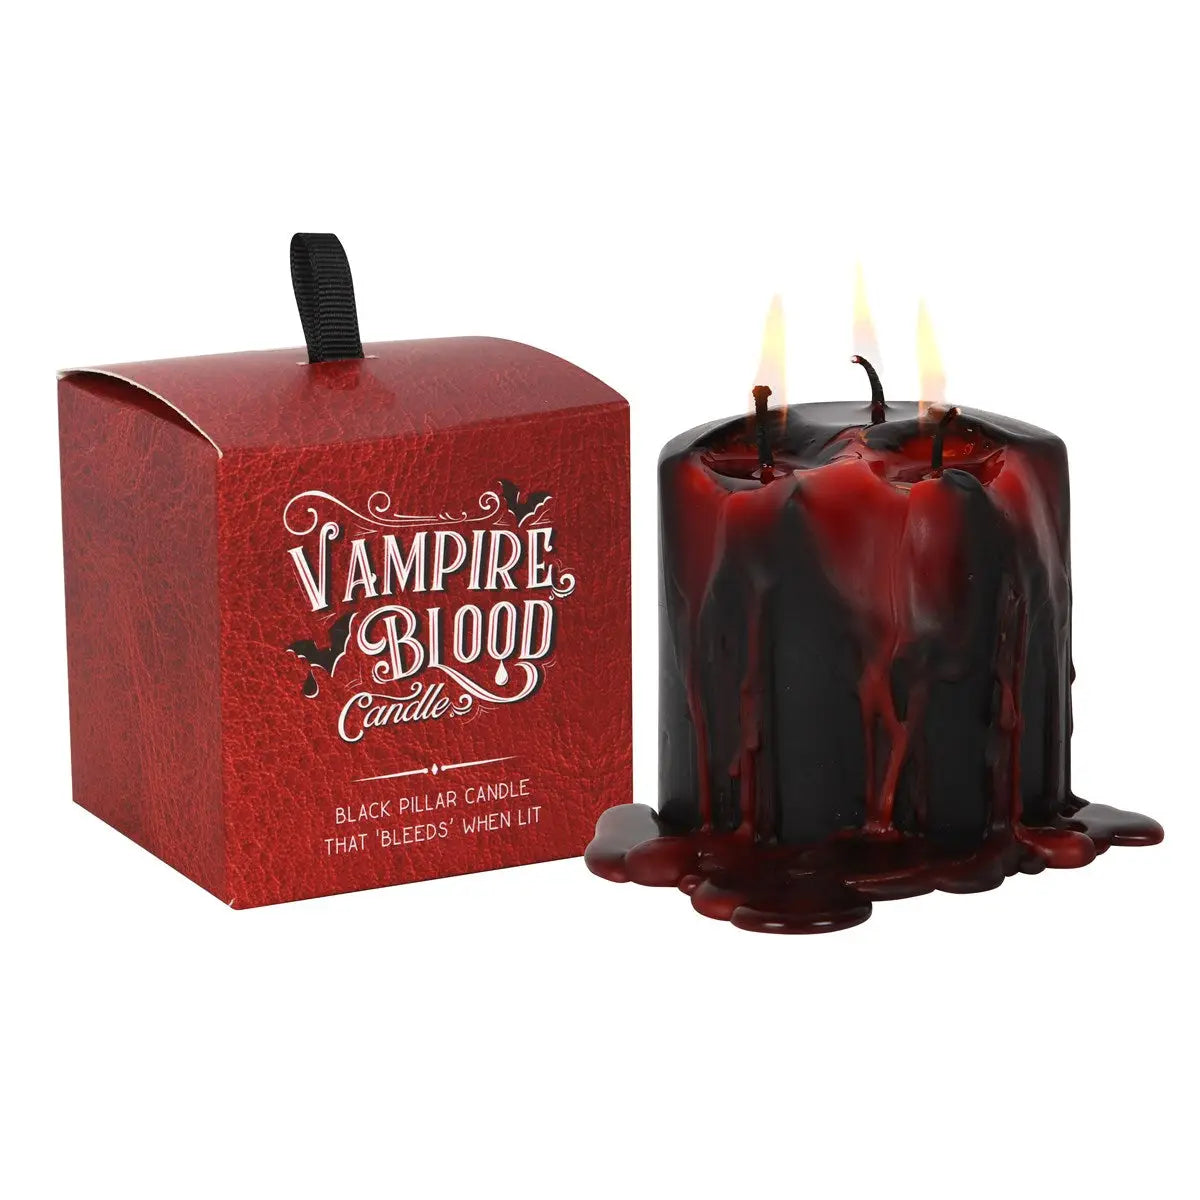 A small black pillar candle that drips bloody red when lit. Shown next to its gift box packaging